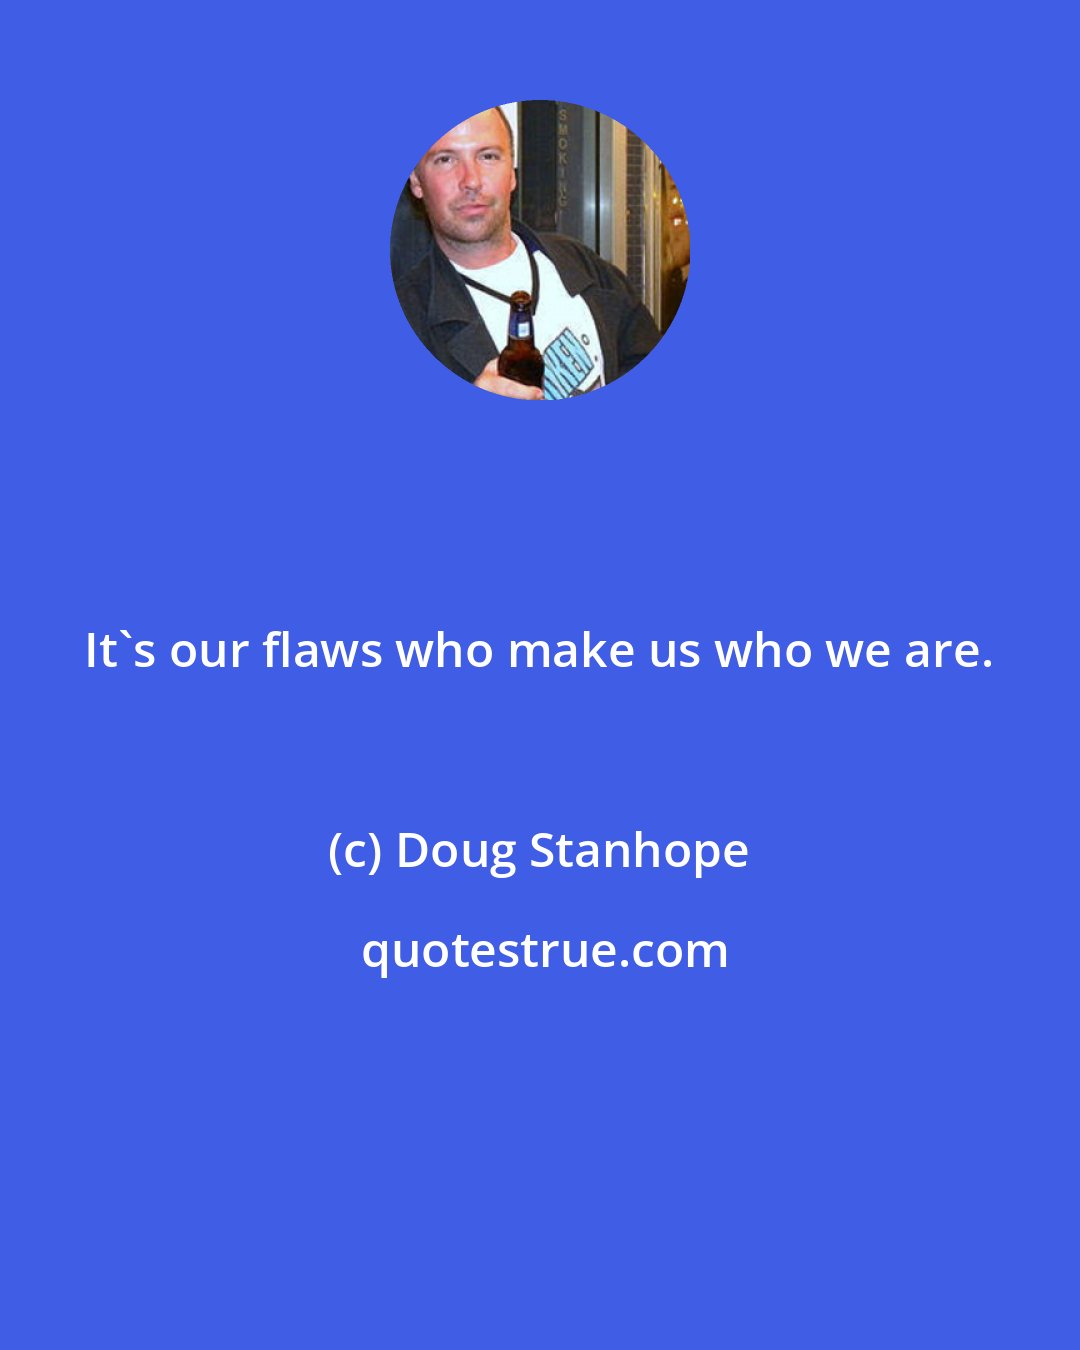 Doug Stanhope: It's our flaws who make us who we are.